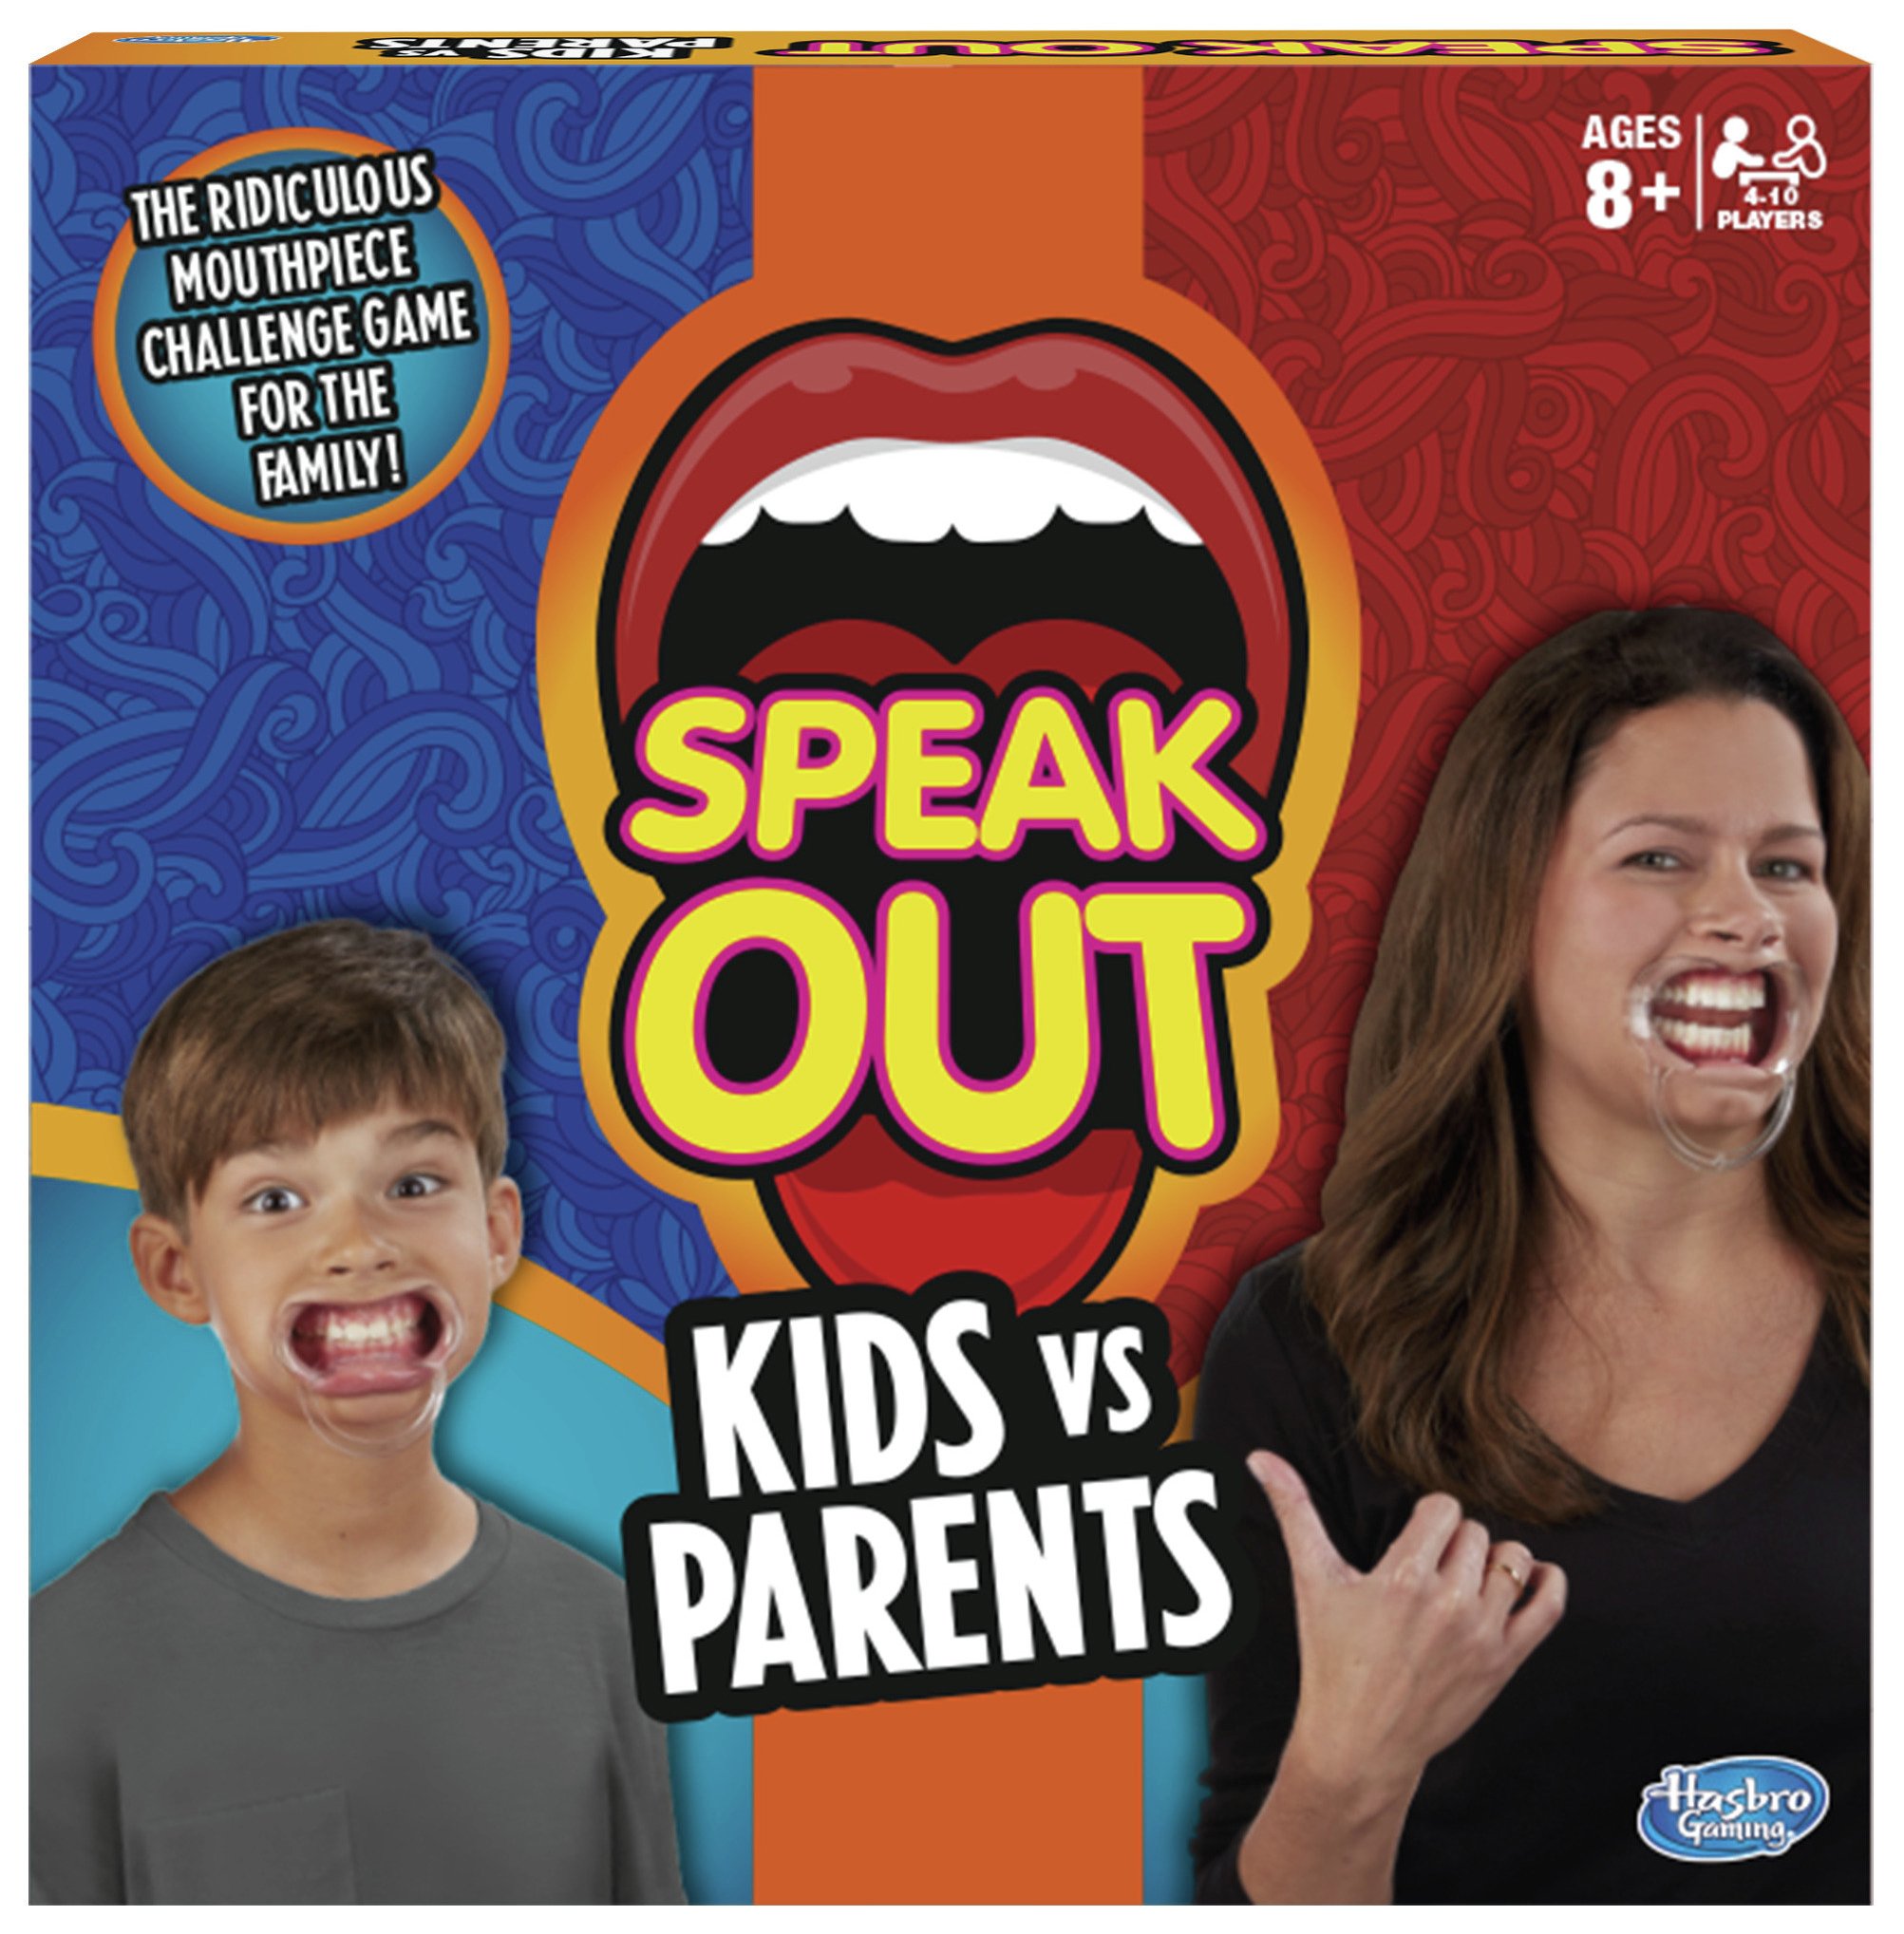 Speak Out Kids vs Parents Game from Hasbro Gaming